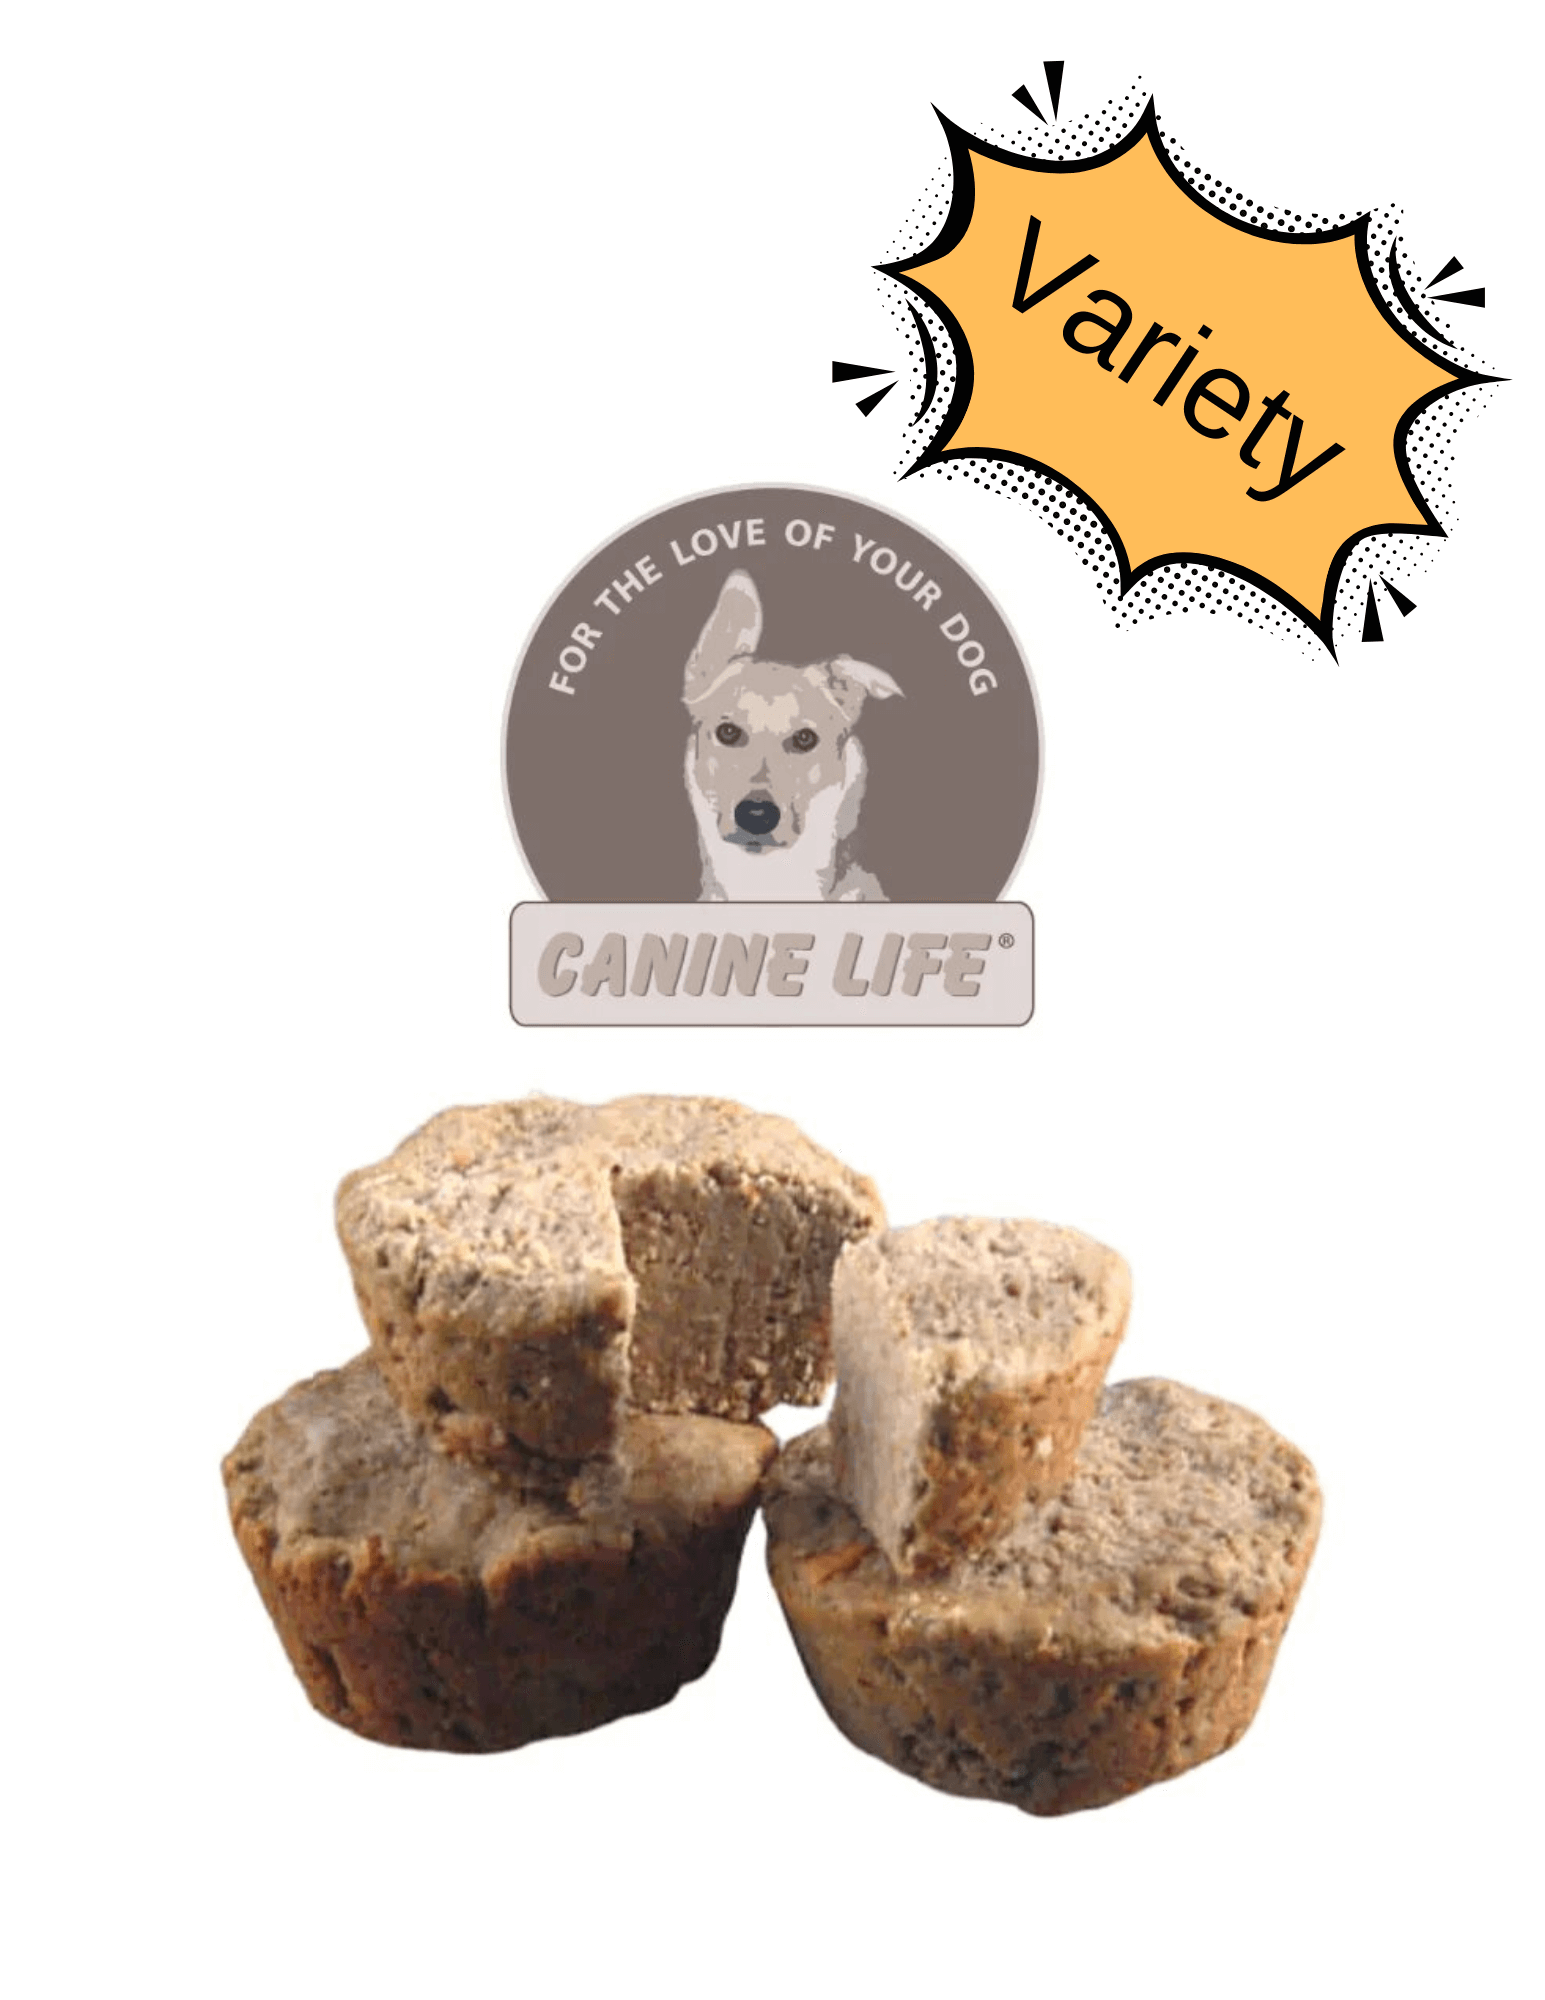 Canine Life - Variety Pack (Beef, Chicken, Turkey) (For Dogs) - Frozen Product